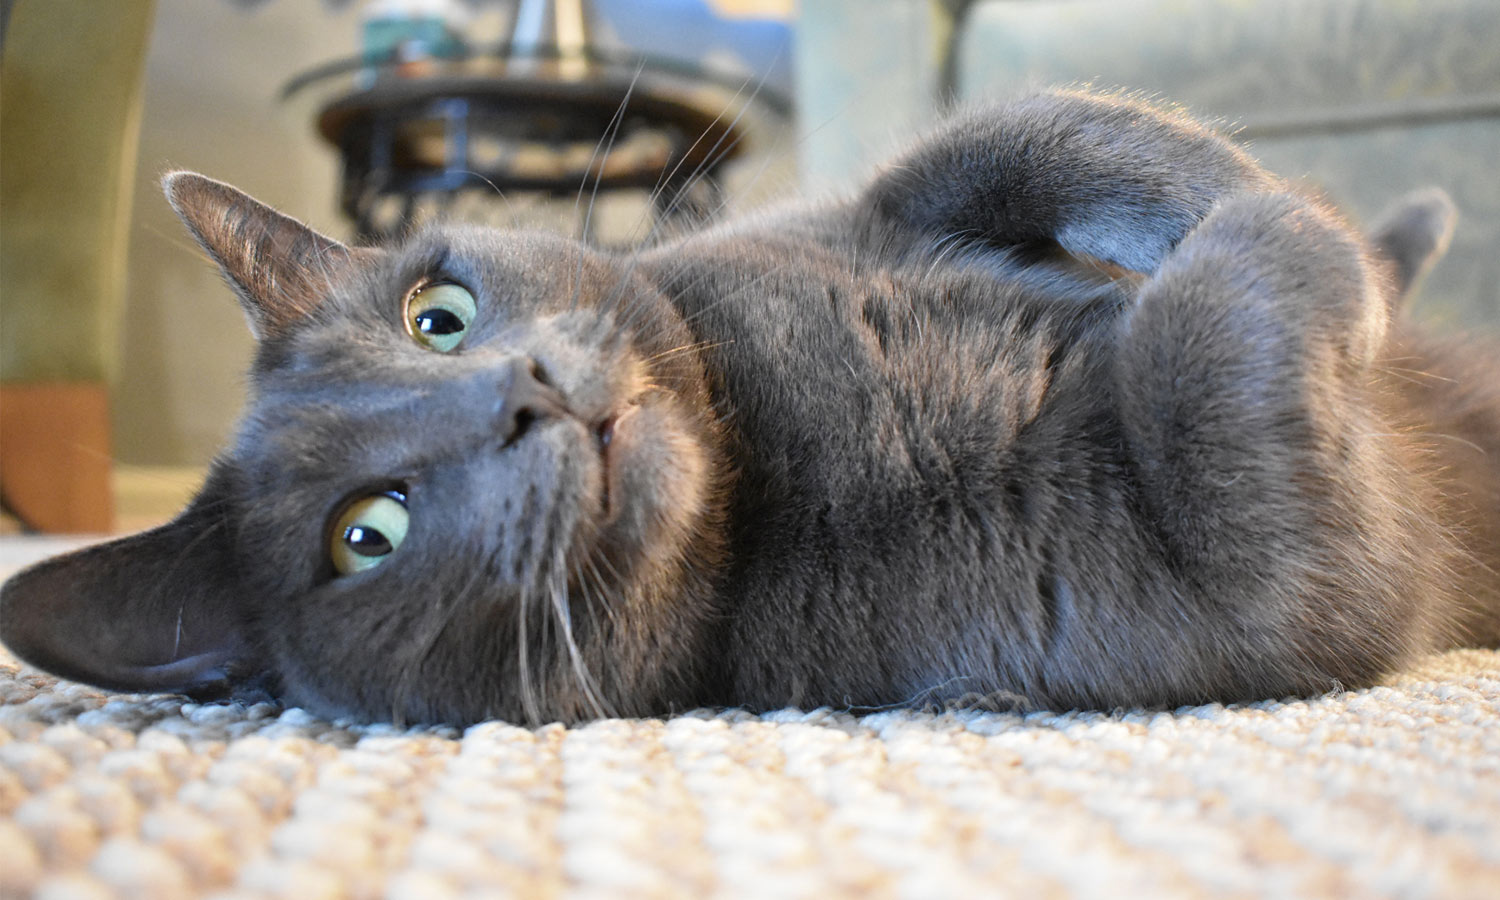 Leila sent a picture of her stunning grey and green-eyed cat, Stella, who is relaxing on the floor. 